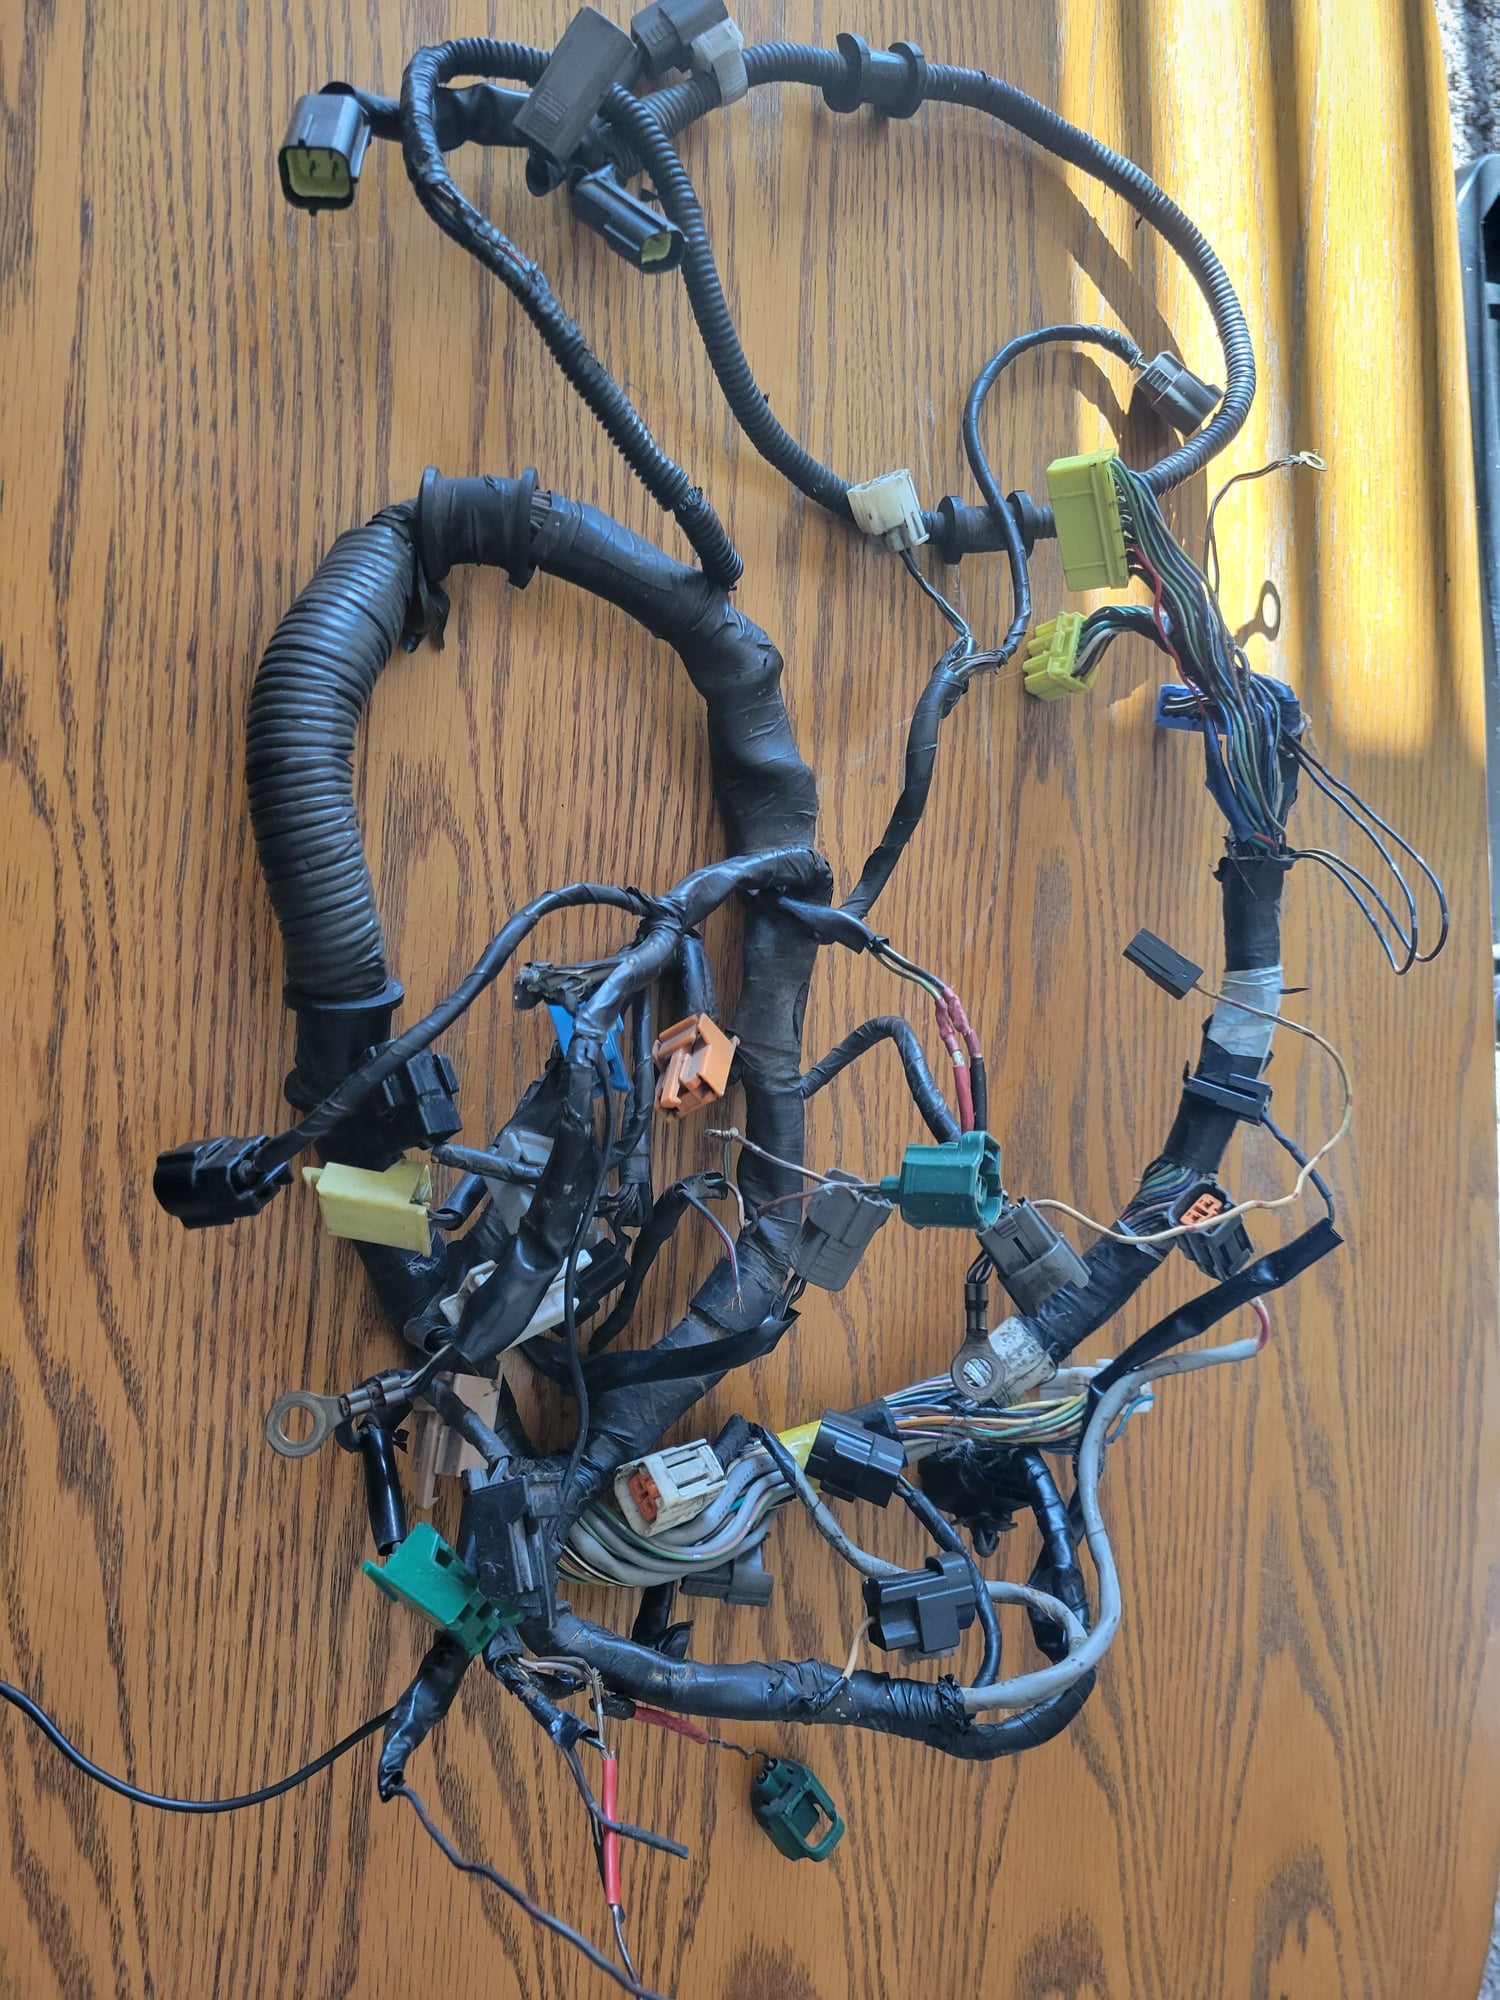 Engine - Electrical - FD R1 RX7 wiring harnesses - Used - 0  All Models - Muscatine, IA 52761, United States